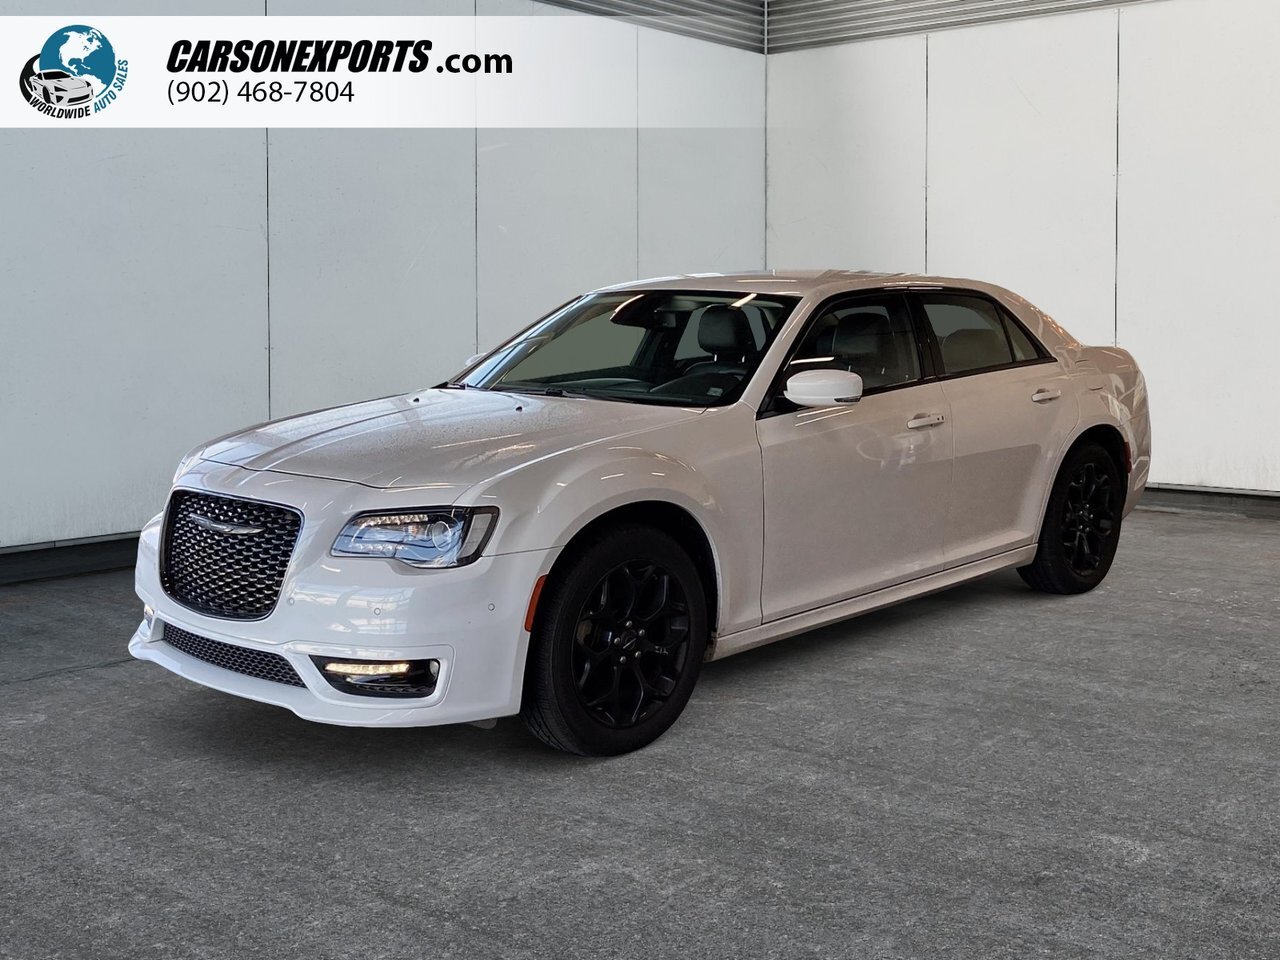 2022 Chrysler 300 Touring The best place to buy a used car. Period.